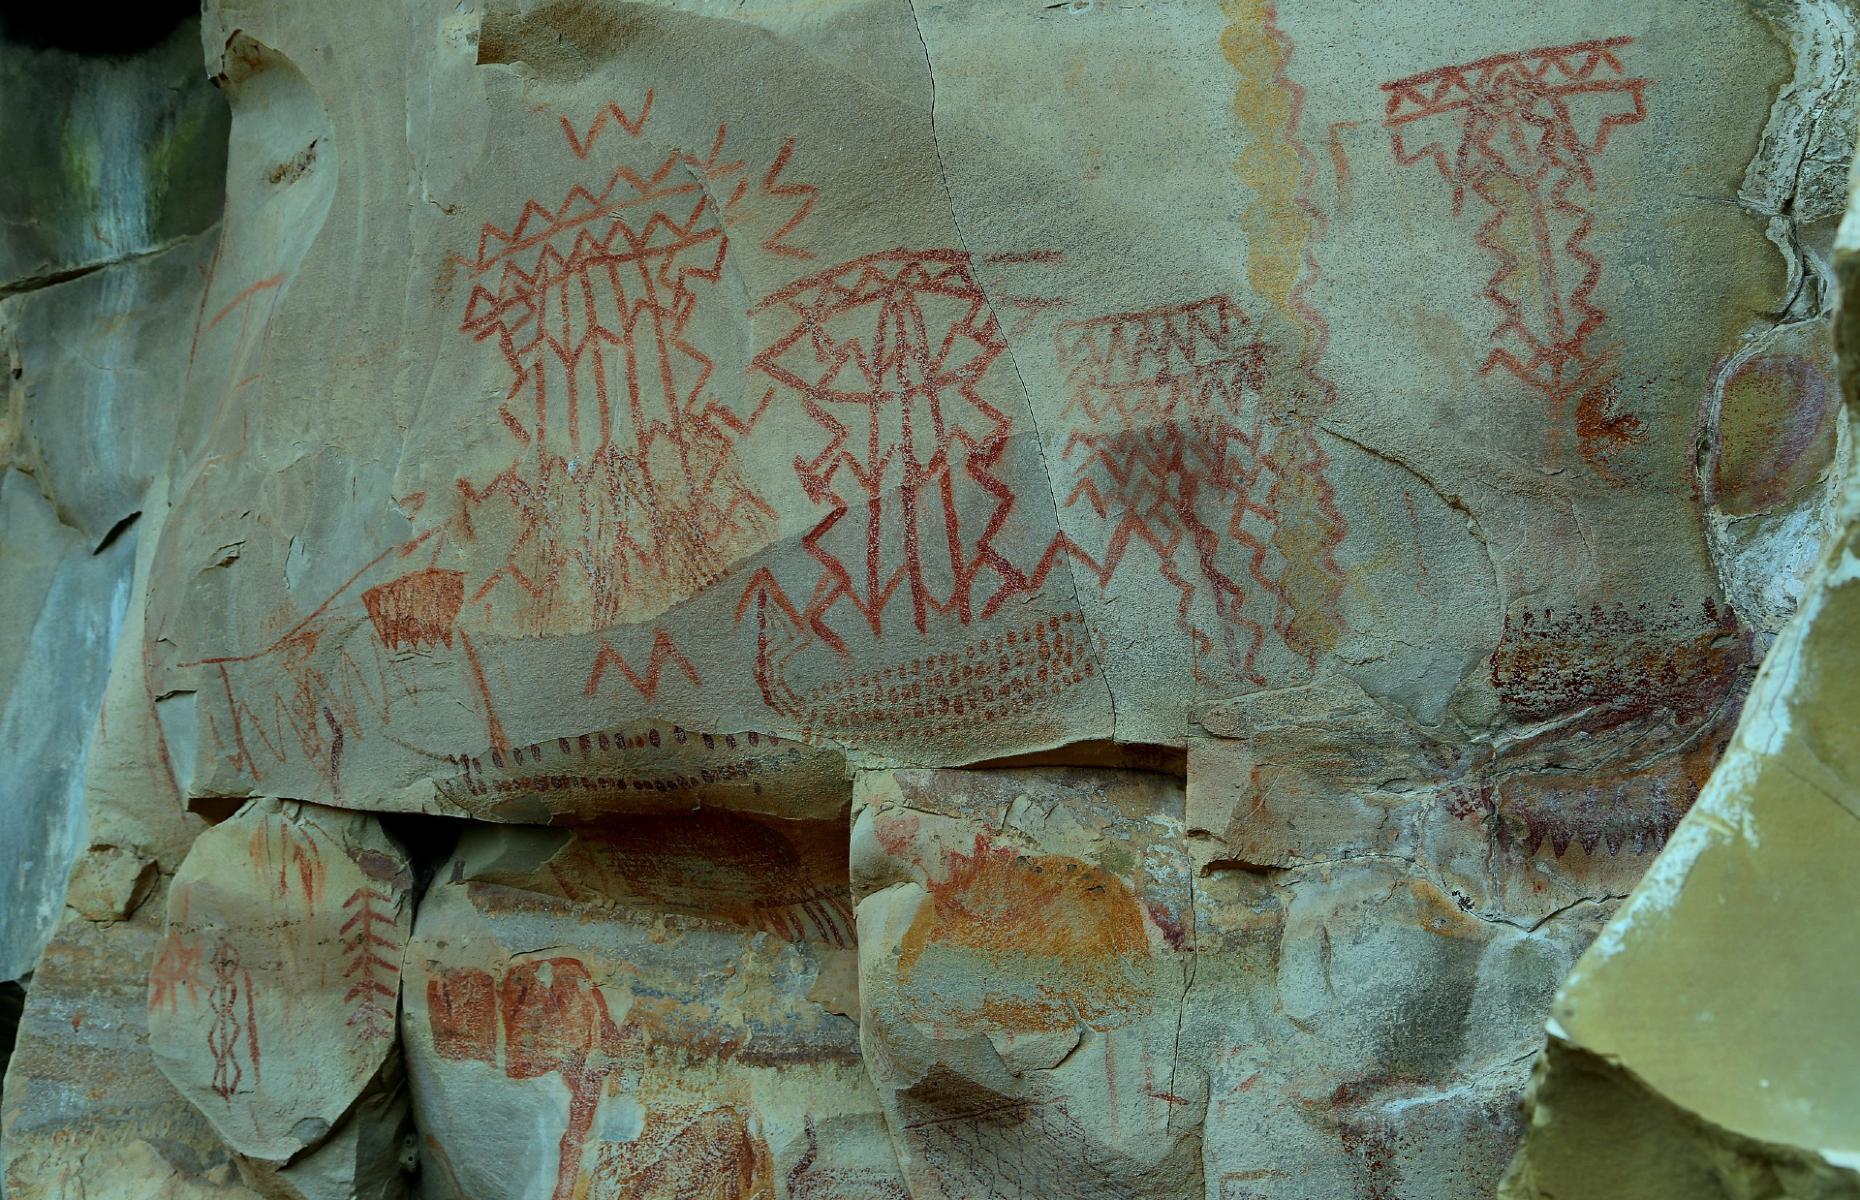 <p>Historians have long been aware of ancient rock art and petroglyphs across the North American continent. Archaeologist Carolyn Boyd has made the study of the Pecos River Style in southwest Texas and northern Mexico her specialty, and in 2021 she co-authored a study suggesting that the style's dots and lines of red pigment are supposed to represent sound. According to the study, these 2,000-year-old speech bubbles "denote speech, breath, and the soul."</p>  <p>Some figures have delicate lines from their mouths as though whispering, while one has energetic zigzags as though shouting.</p>